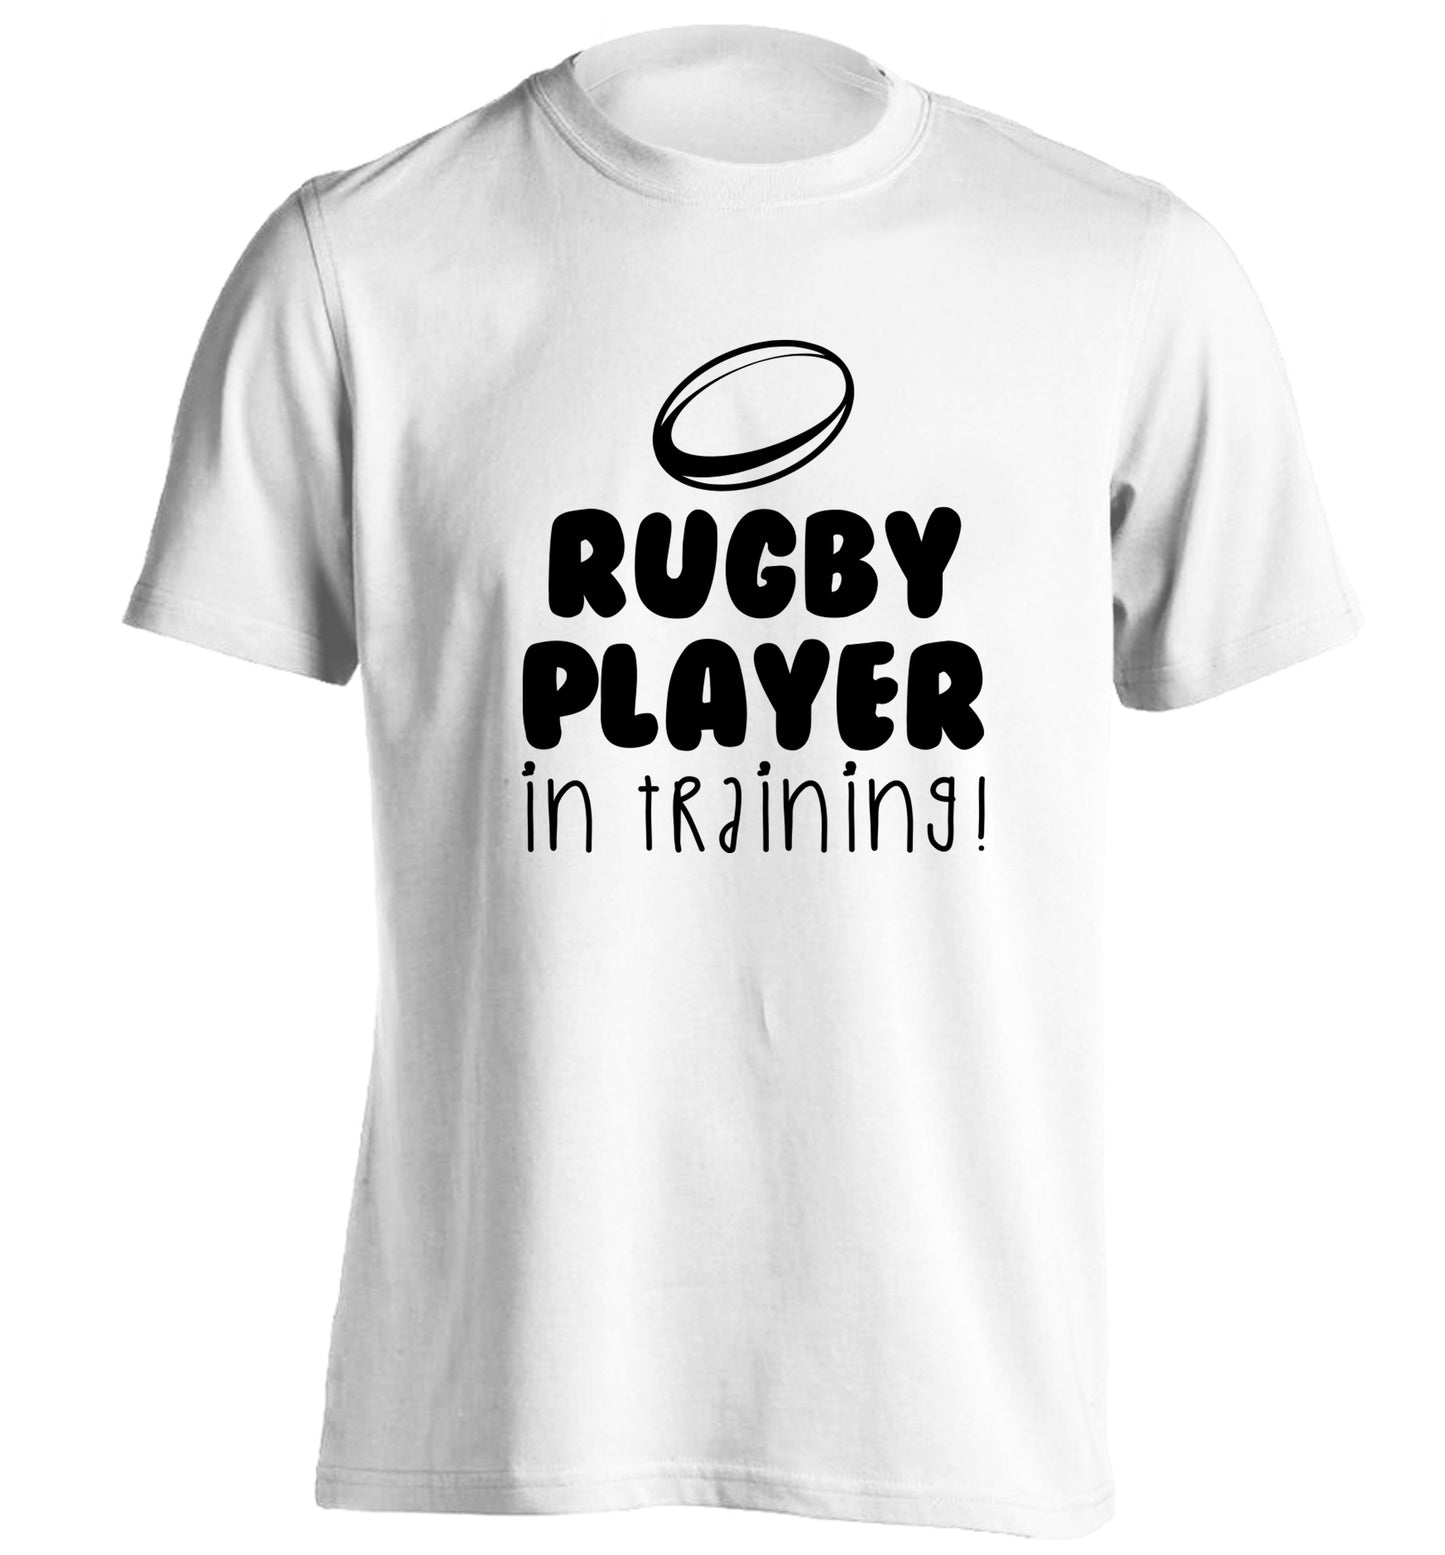 Rugby player in training adults unisex white Tshirt 2XL